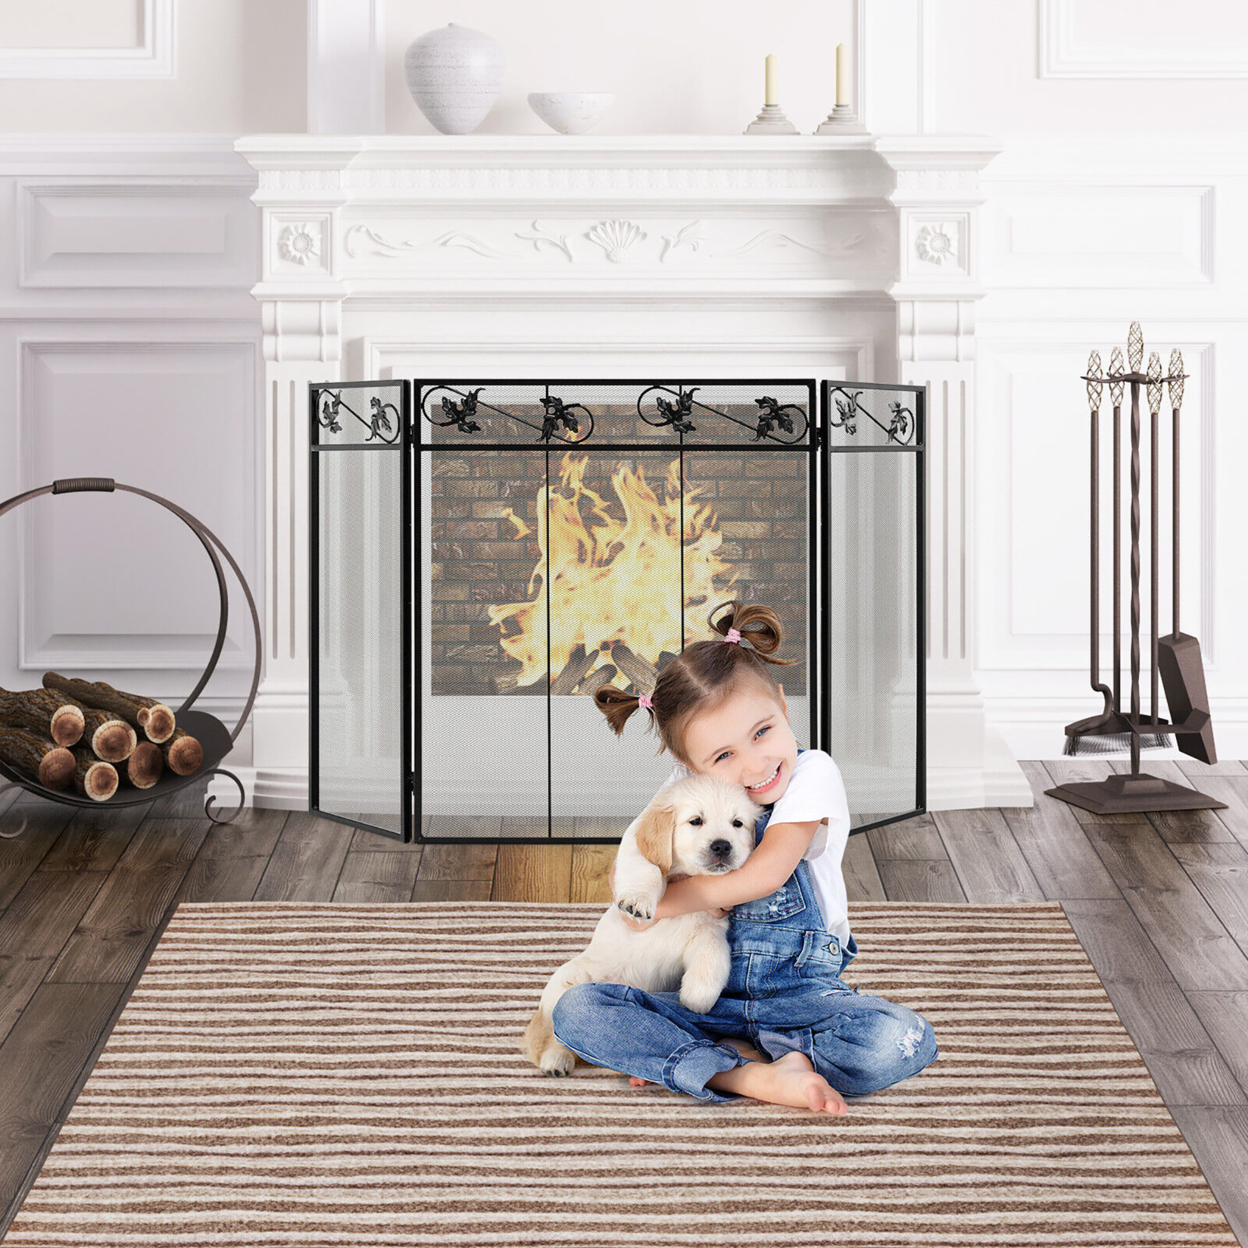 3-Panel Fireplace Screen Decor Cover Baby Child Pets Safty Folded Fire Doors